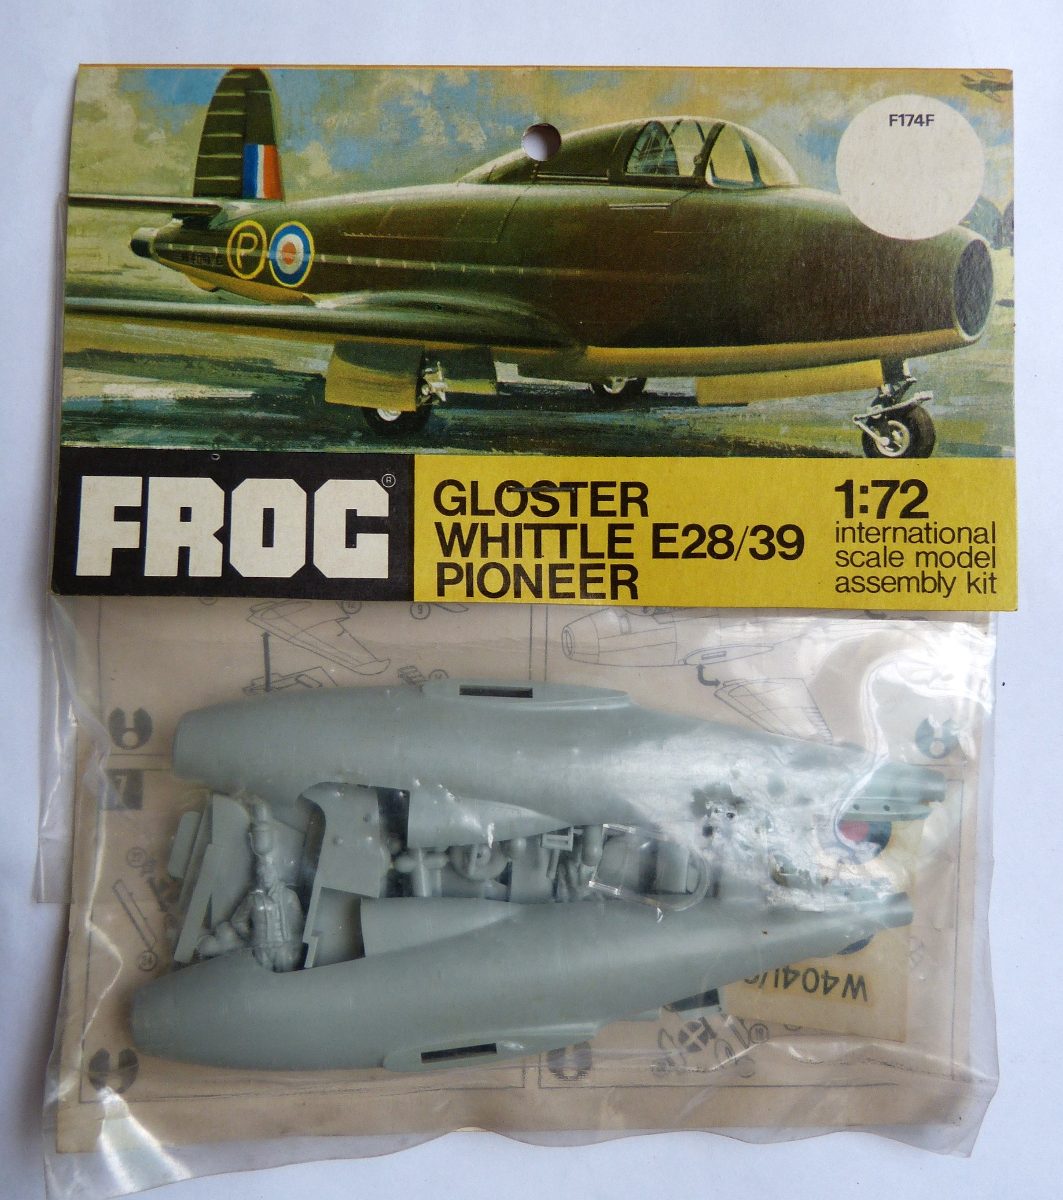 avion-gloster-whittle-e2839-pioneer-frog-172-maqueta-D_NQ_NP_425311-MLA20544214461_012016-F.jpg  by adey m